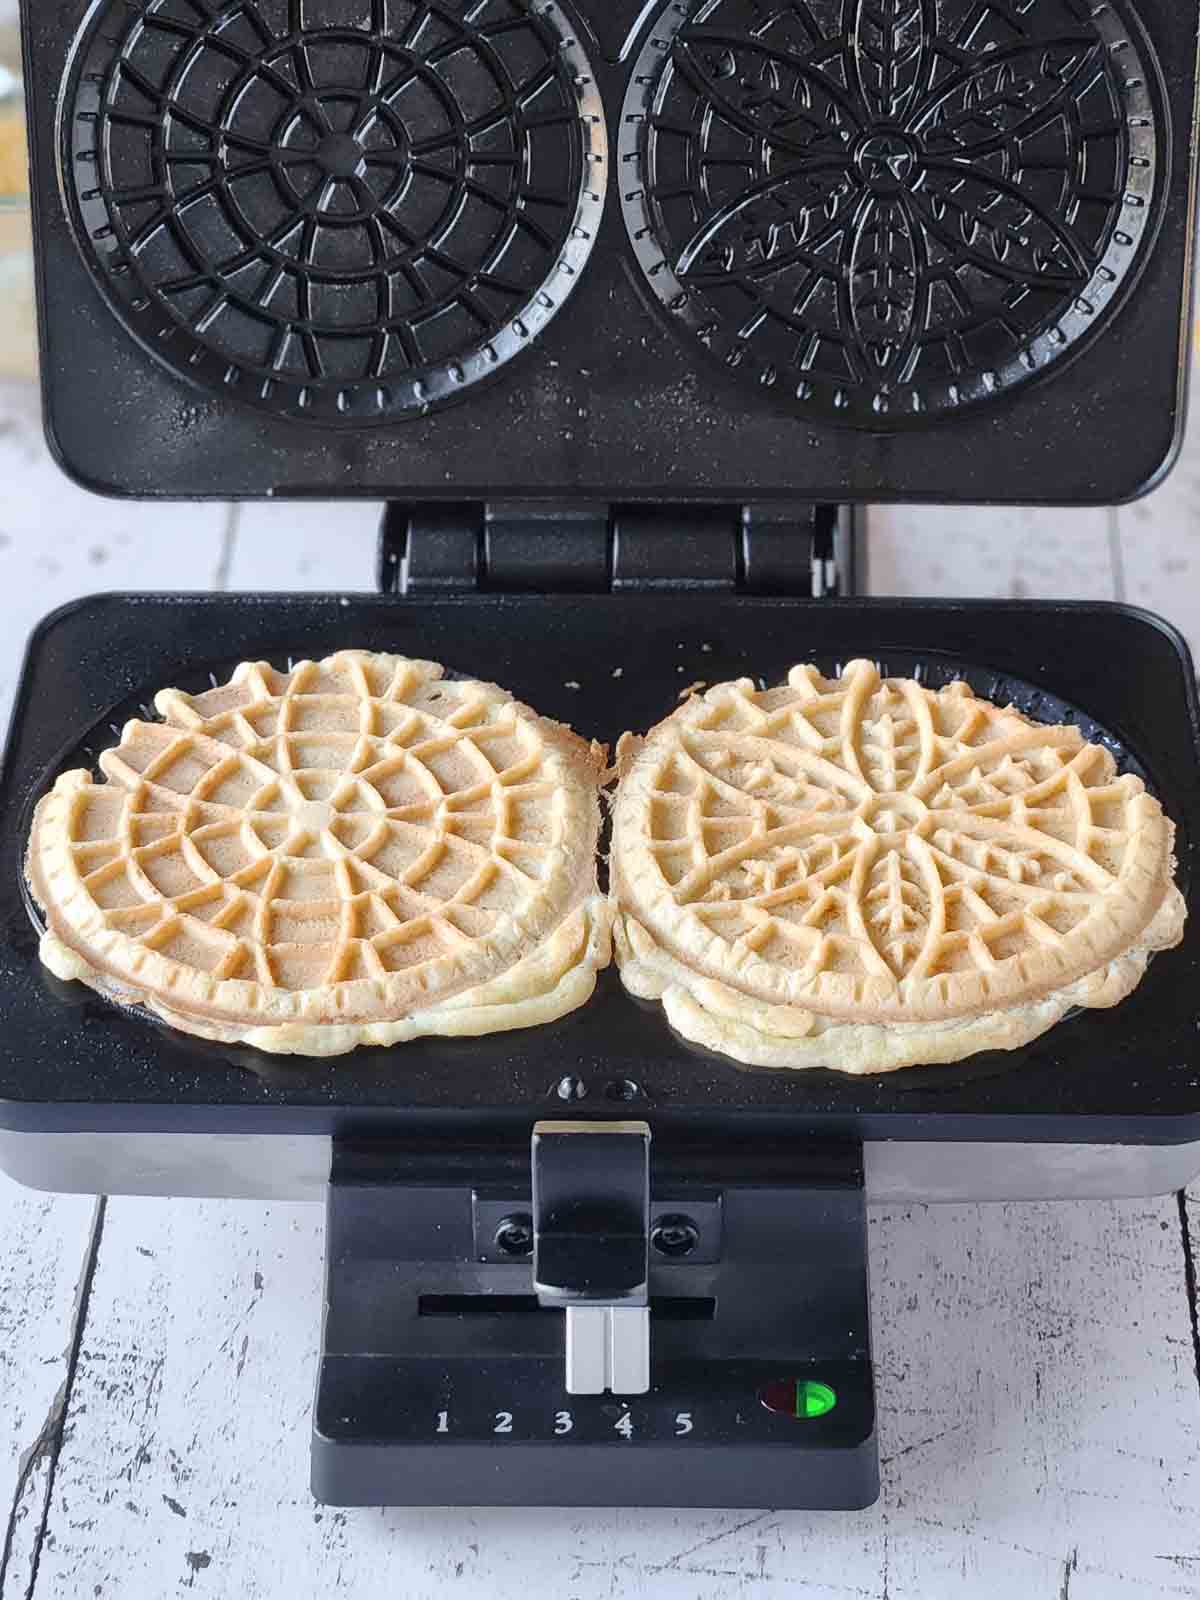 Two cooked pizzelles in a pizzelle maker with the lid open.